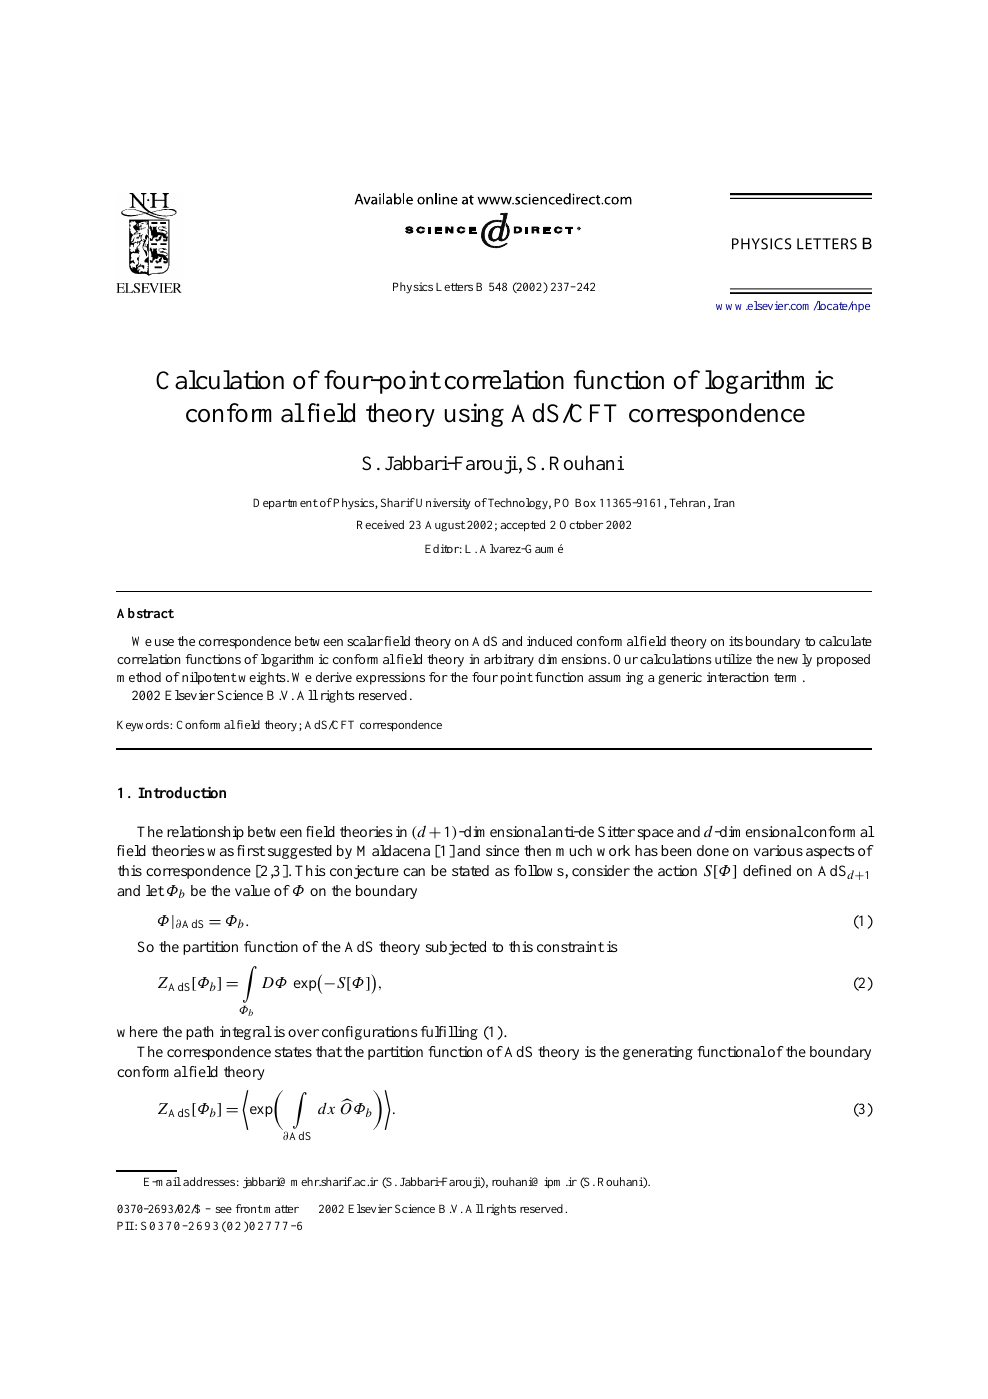 Calculation Of Four Point Correlation Function Of Logarithmic Conformal Field Theory Using Ads Cft Correspondence Topic Of Research Paper In Physical Sciences Download Scholarly Article Pdf And Read For Free On Cyberleninka Open